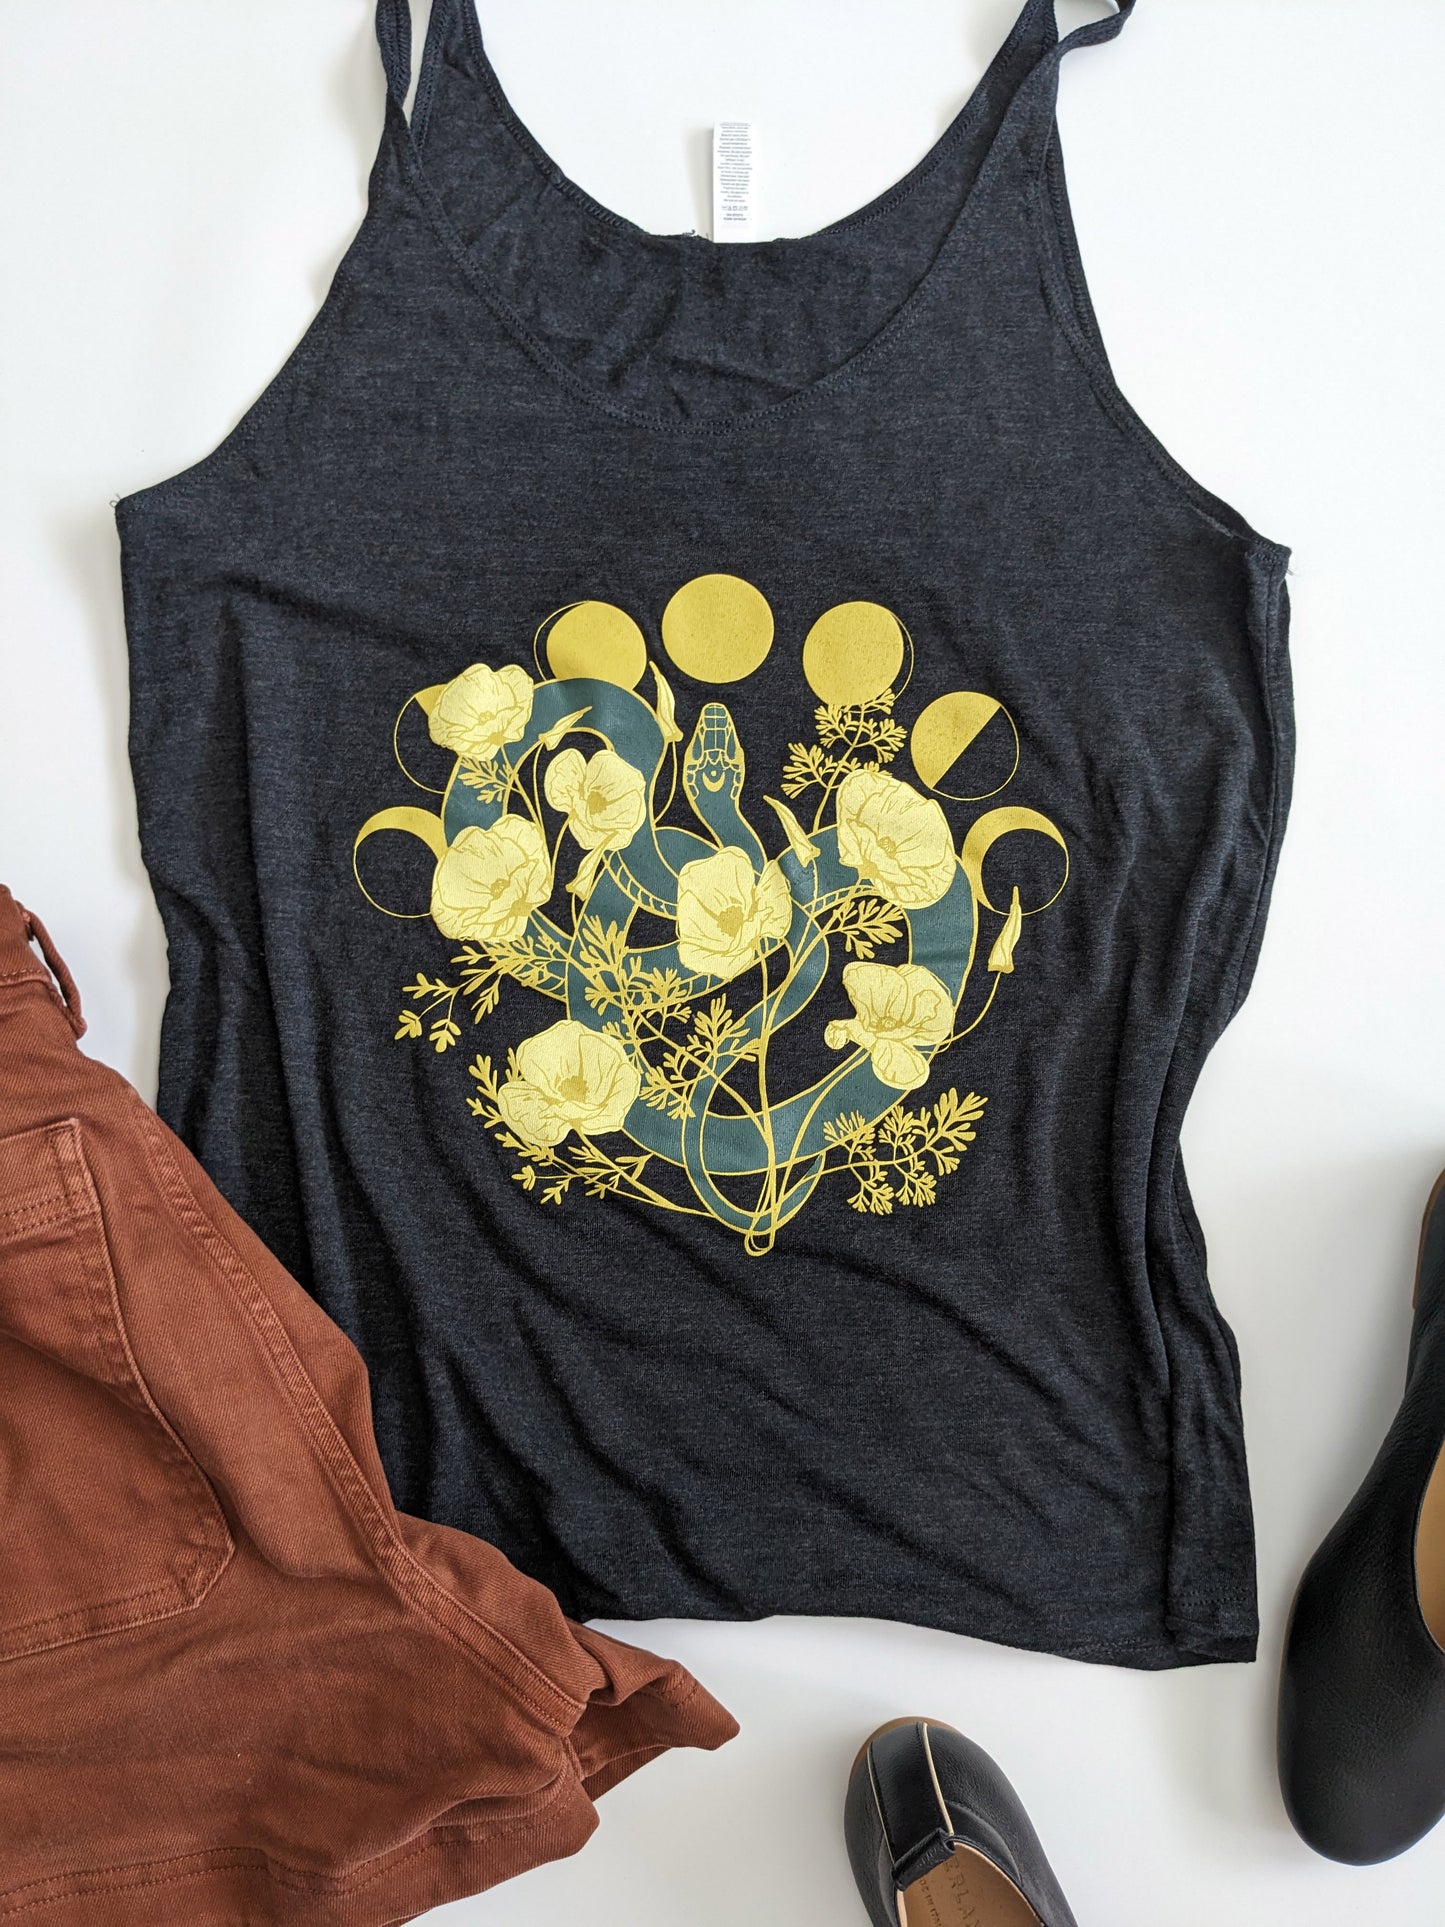 This super soft tank top features a snake among poppy flowers and the phases of the moon.